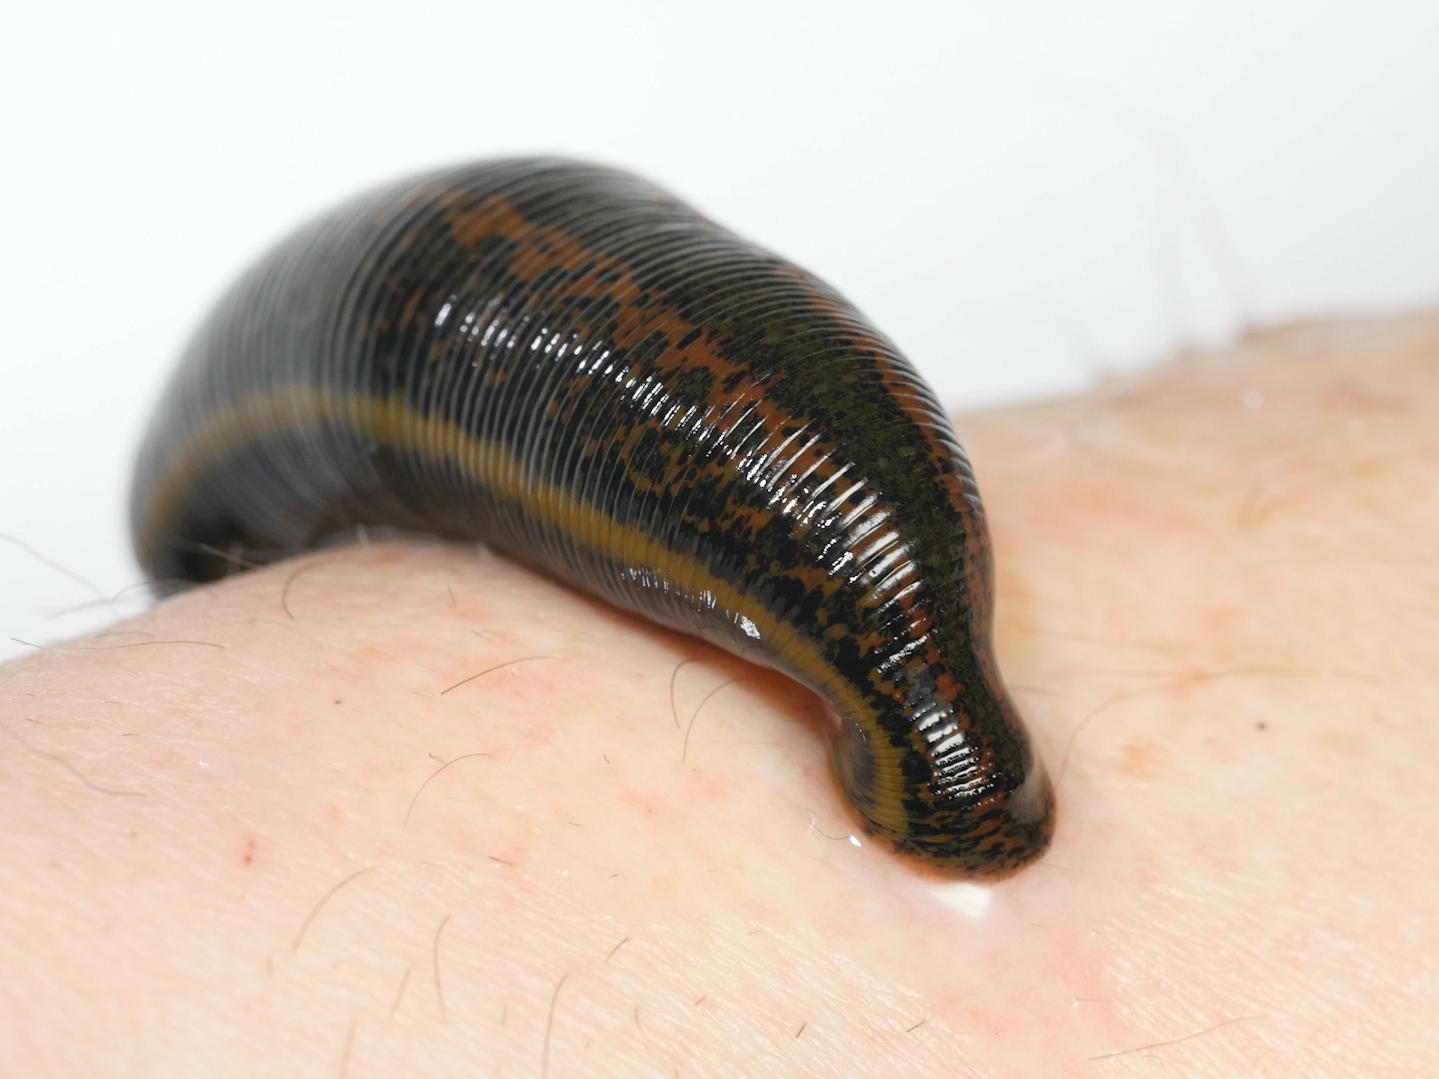 WATCH See How Leeches Can Be A Surgeon's Sidekick WUNC